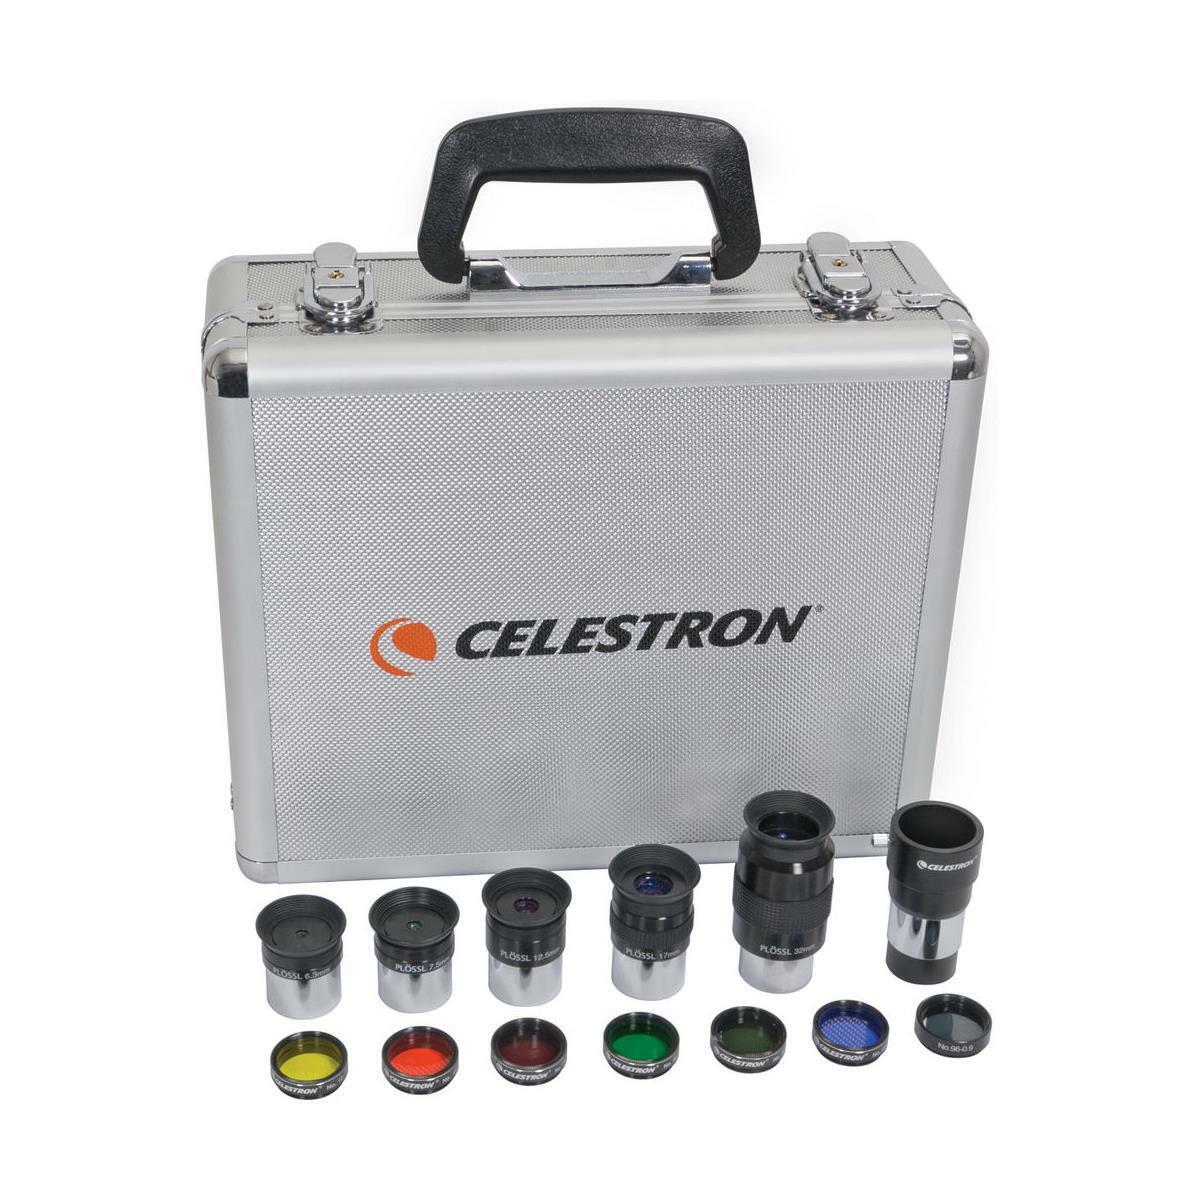 Celestron Accessory Kit with Five 1.25